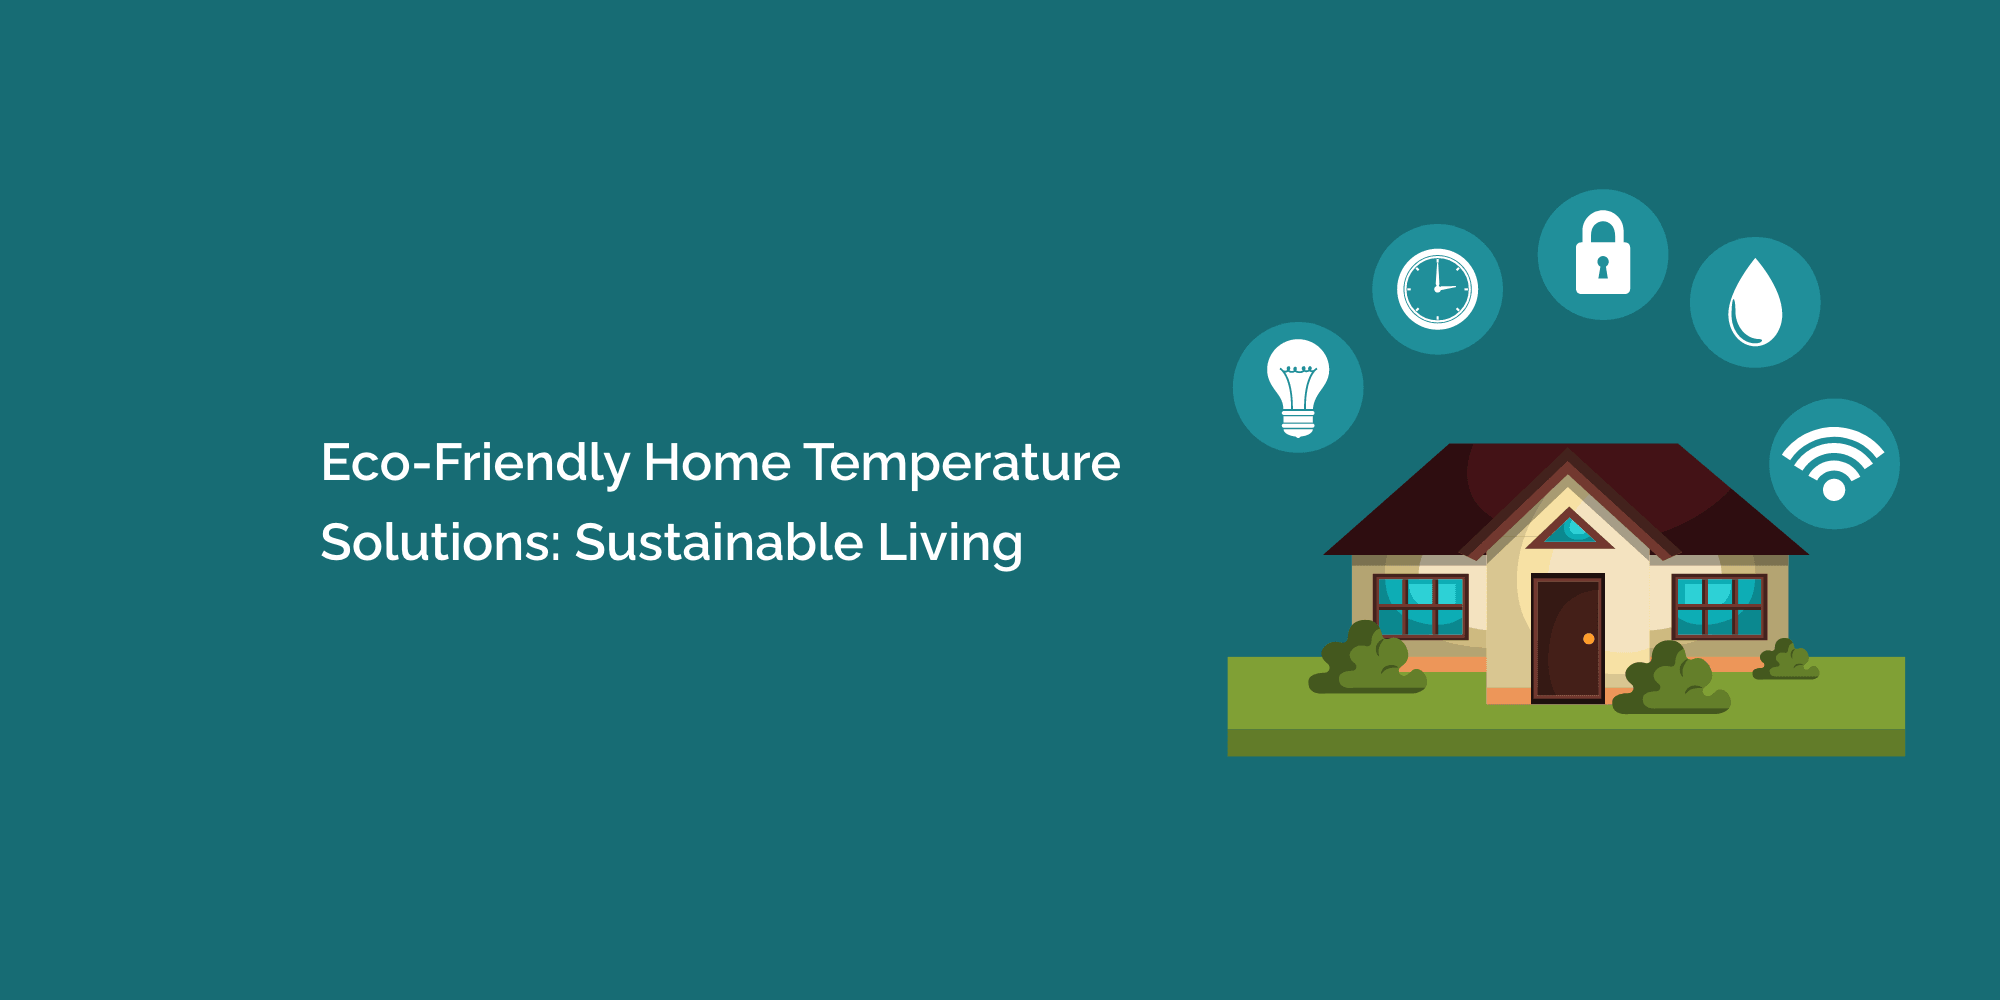 Eco-Friendly Home Temperature Solutions: Sustainable Living